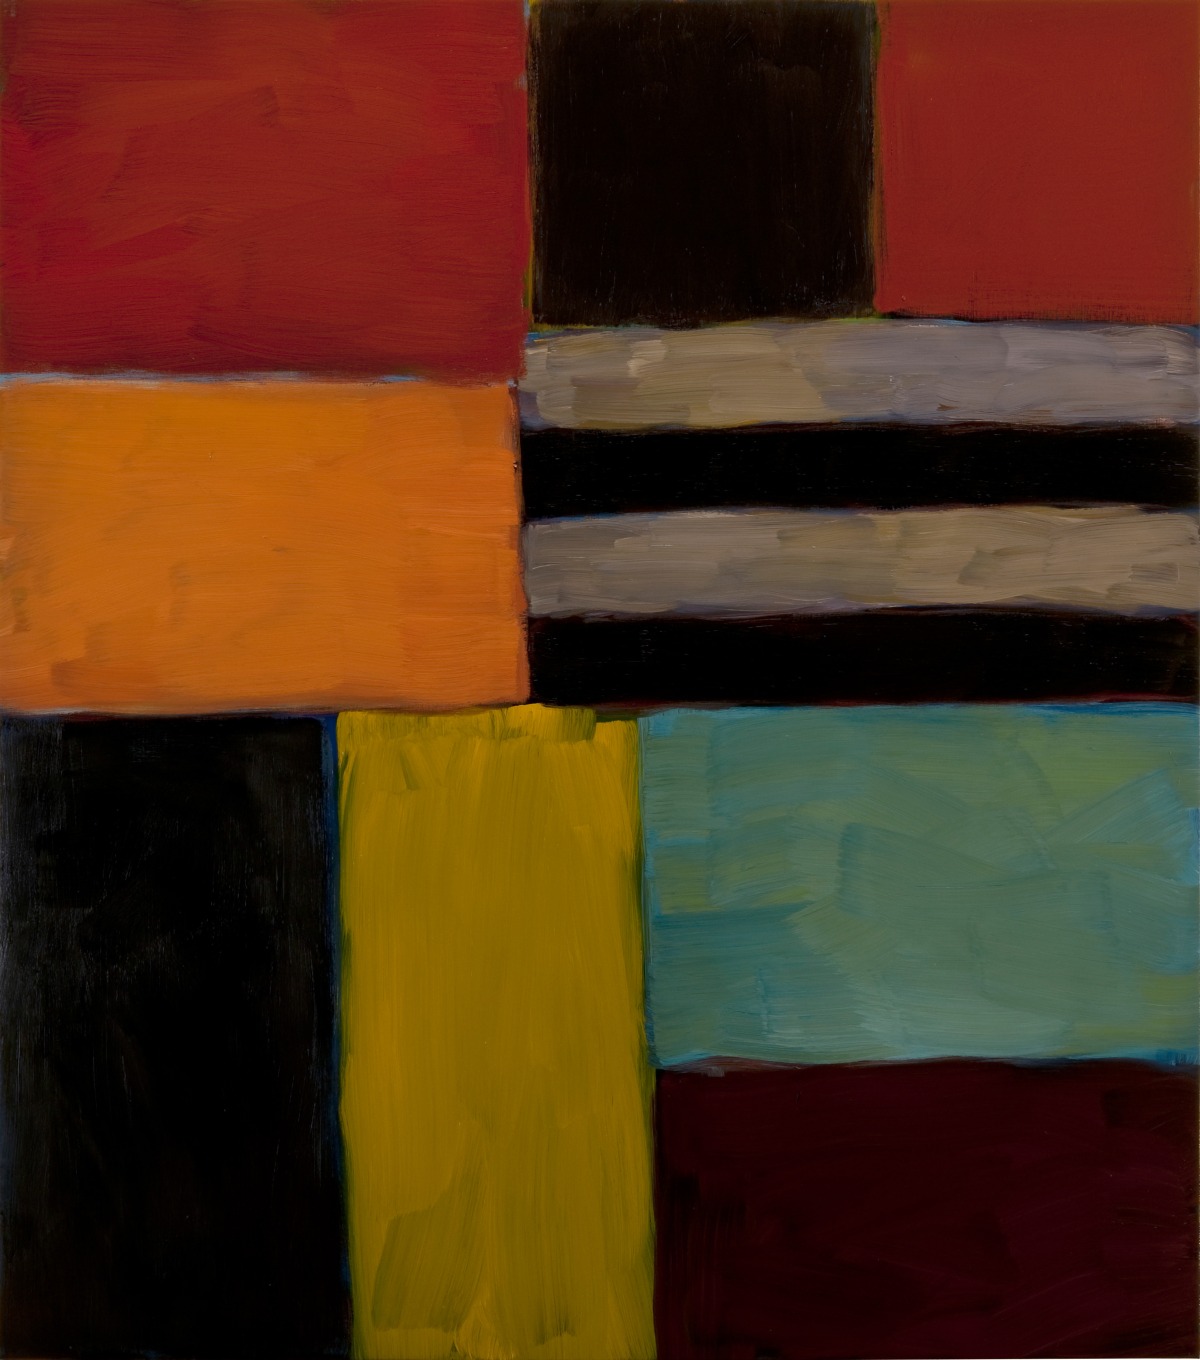 Sean Scully, Cut Ground Green, 2008, © Sean Scully, photo: courtesy of the artist 